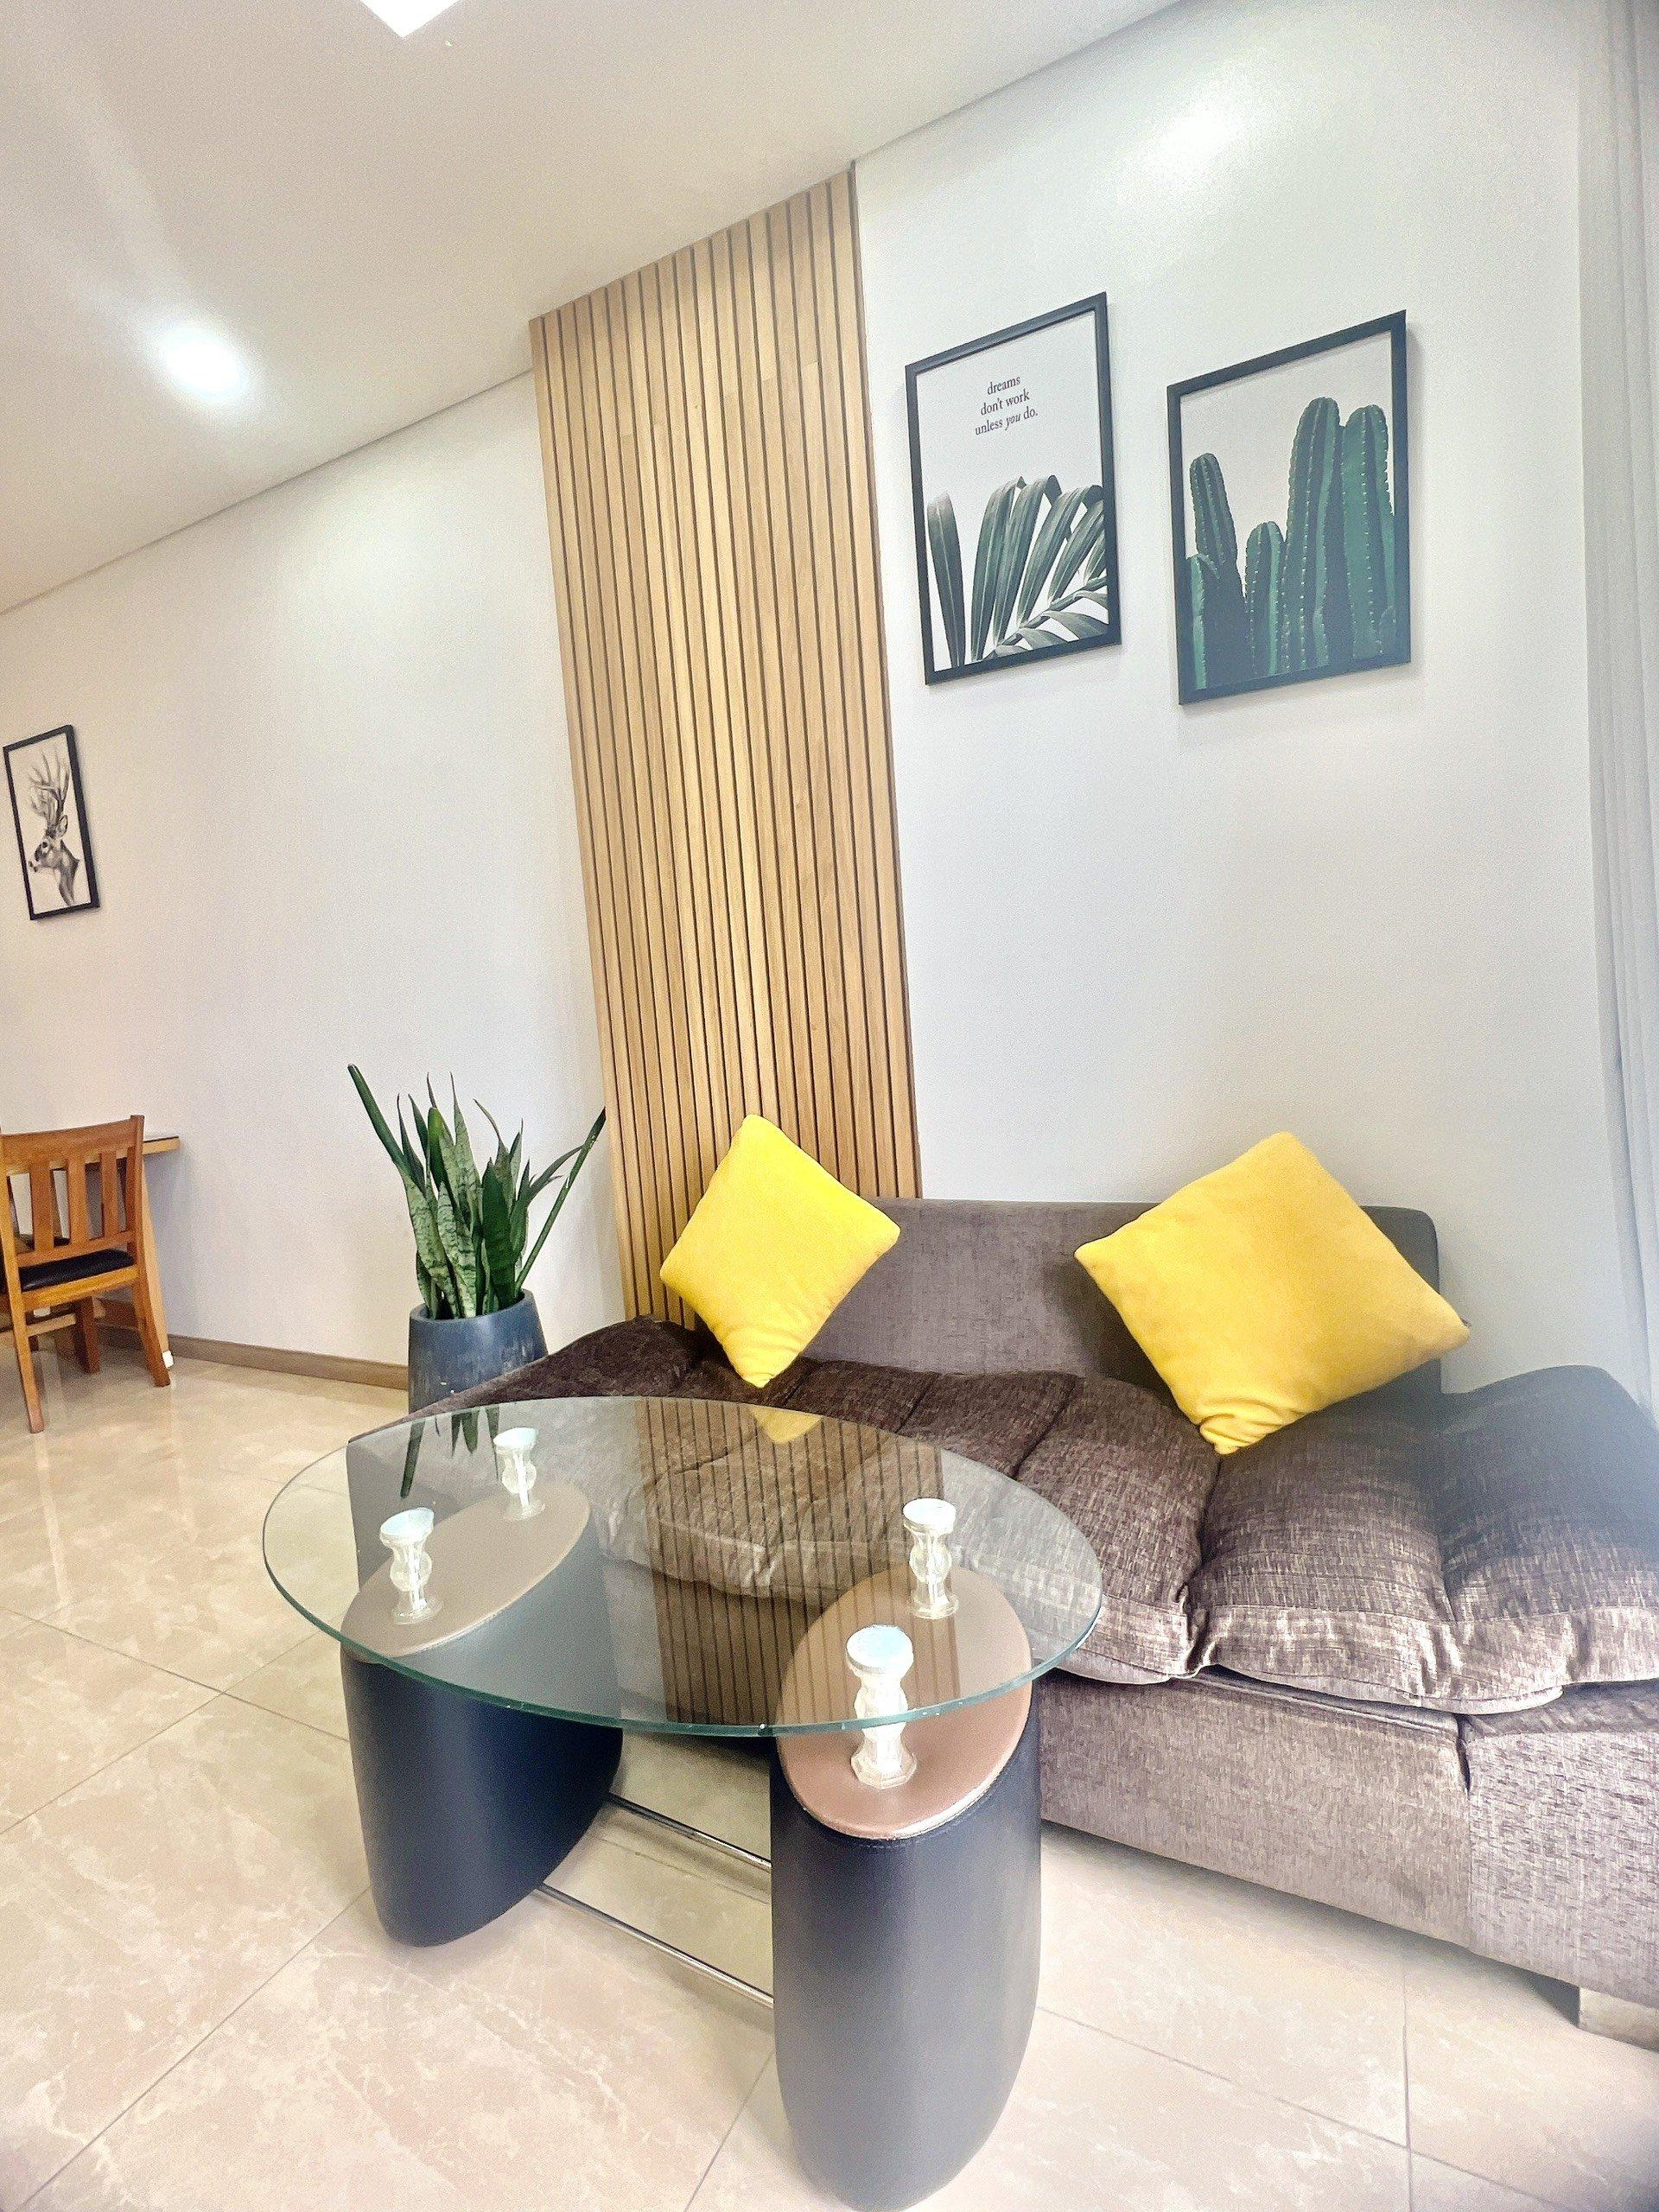 MONARCHY DANANG - 02 BEDROOM APARTMENT FOR RENT  - 100% NEW FURNITURE